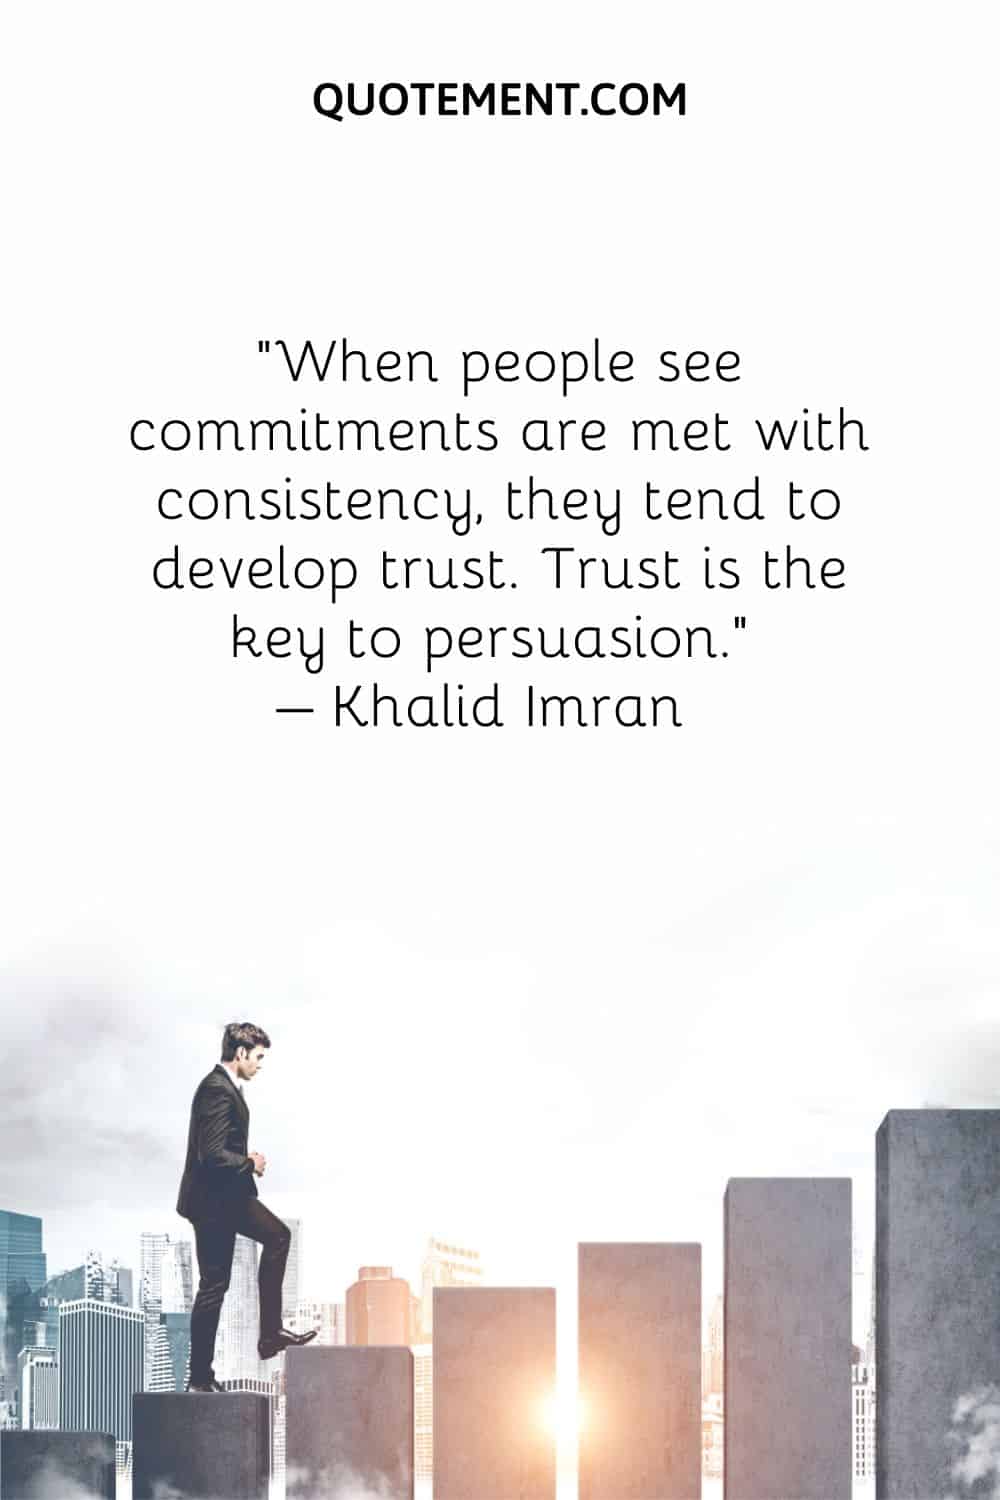 When people see commitments are met with consistency, they tend to develop trust.